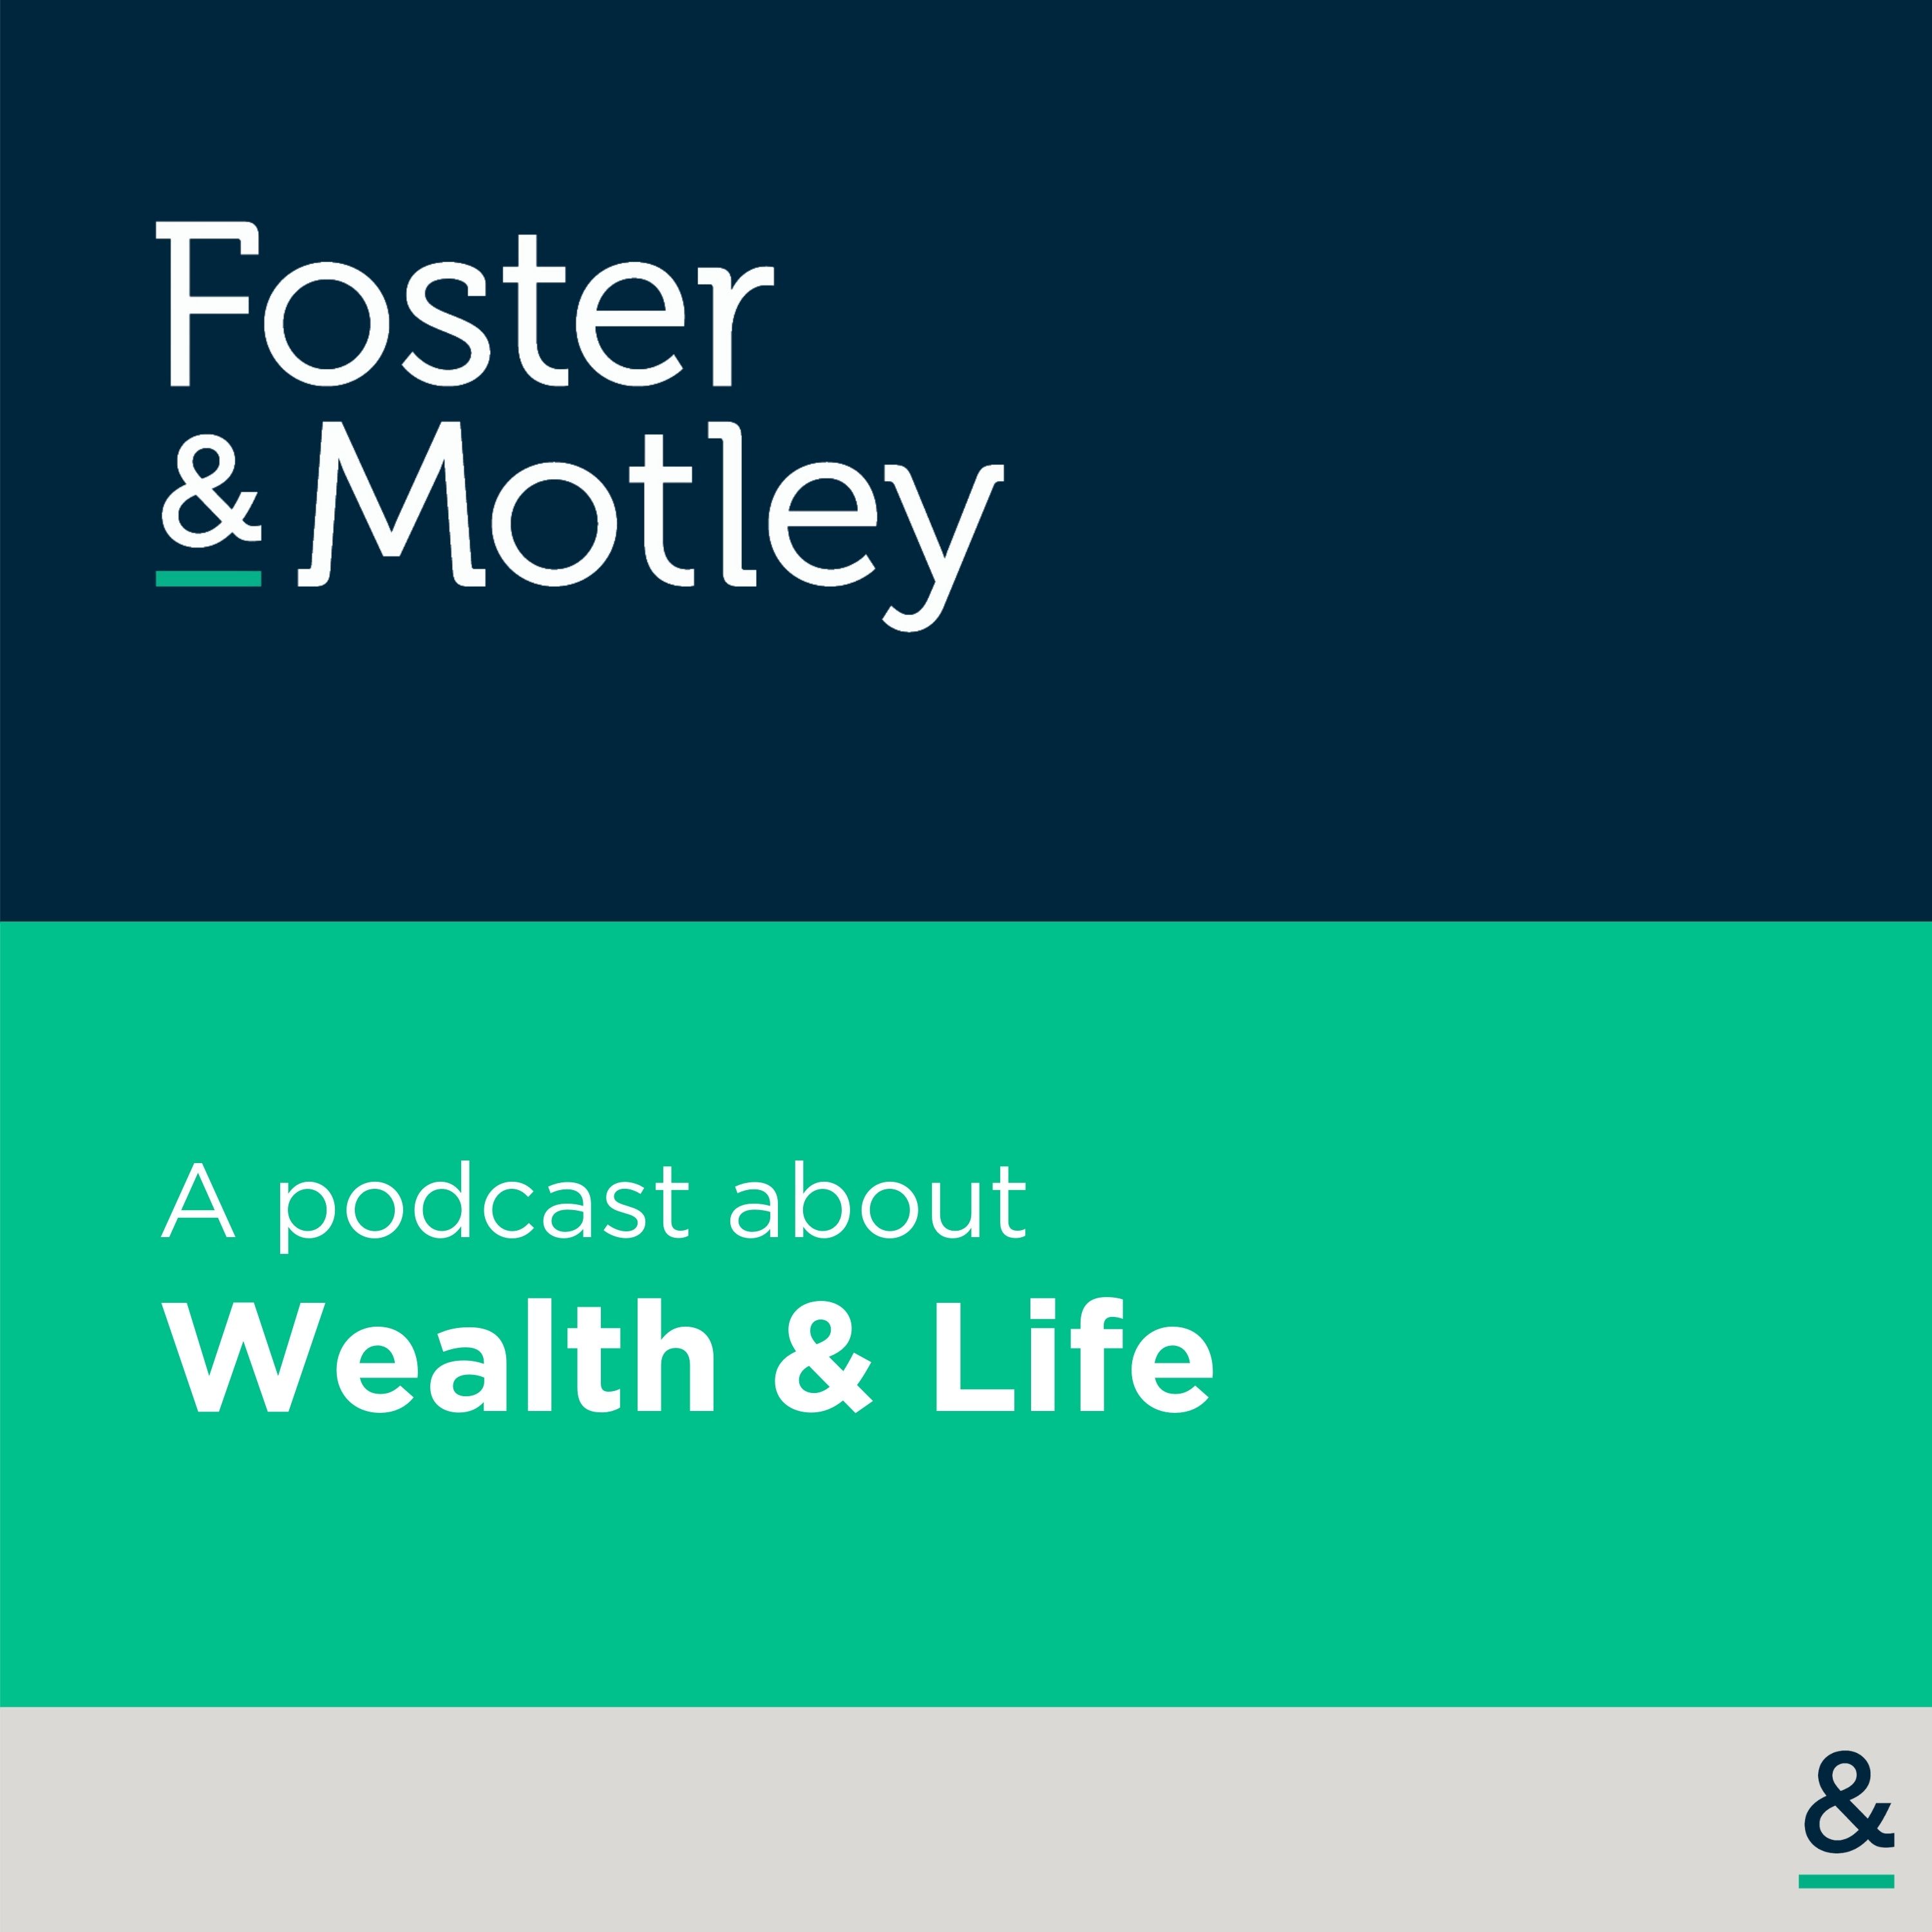 Foster & Motley : A podcast about Wealth & Life